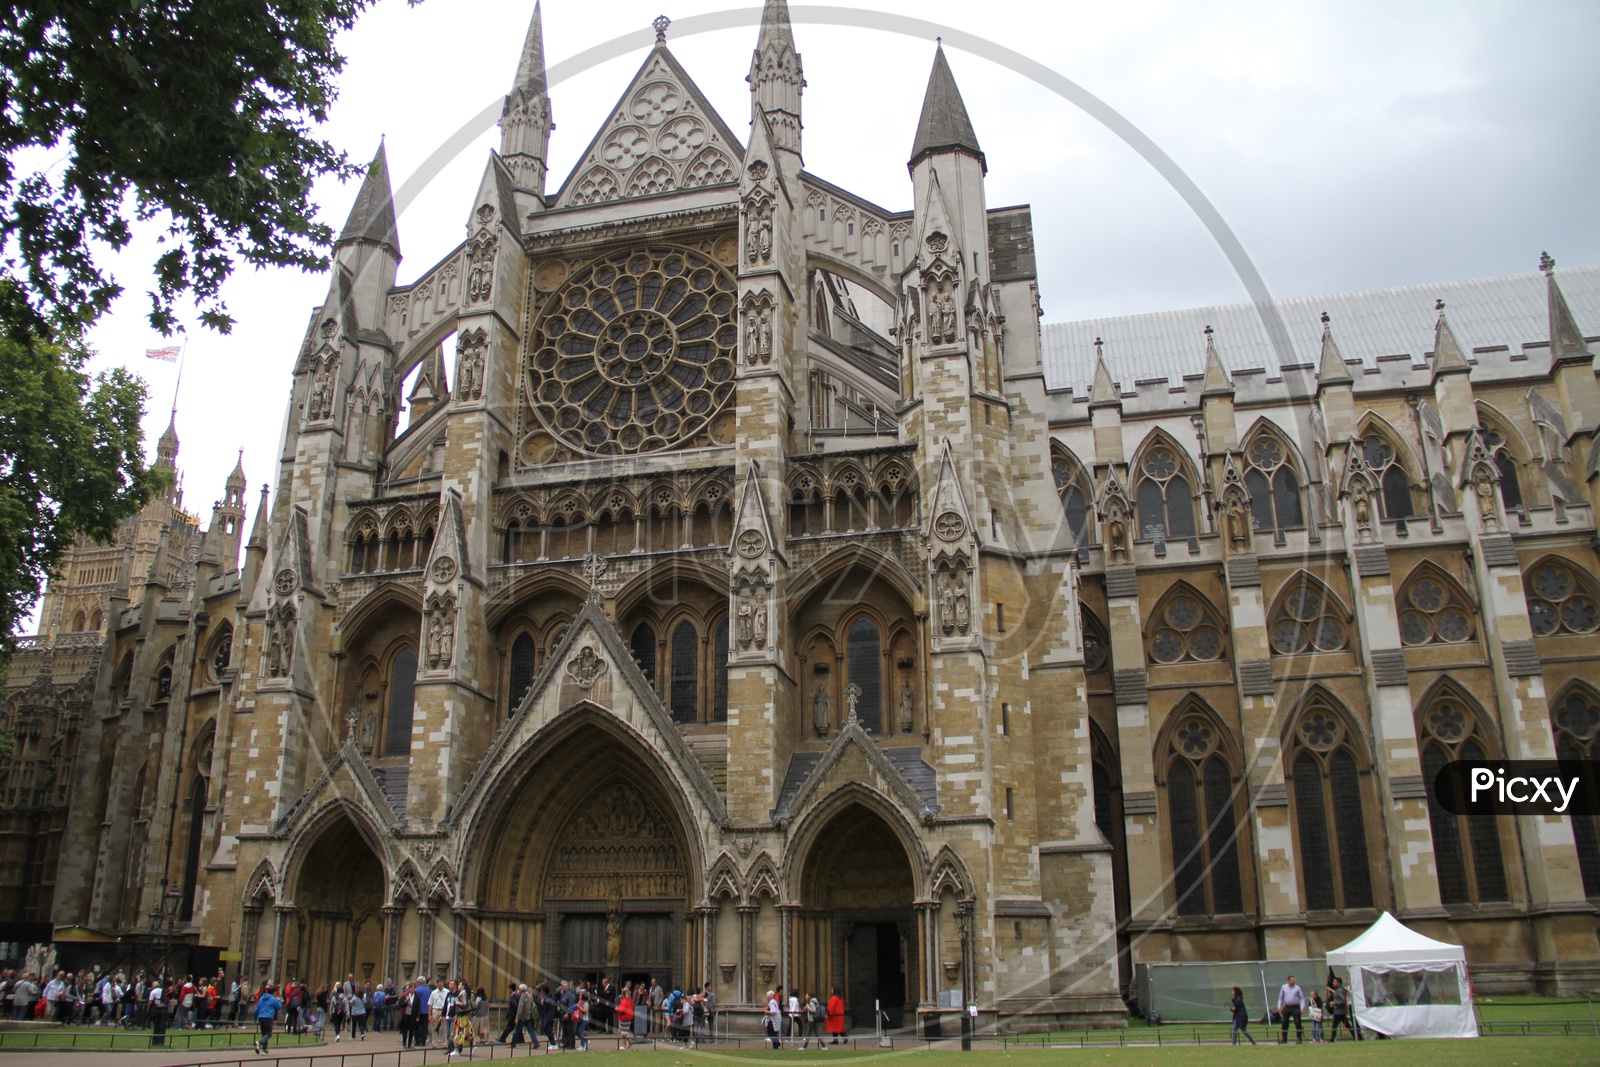 Tourists at Westminster Abbey Church